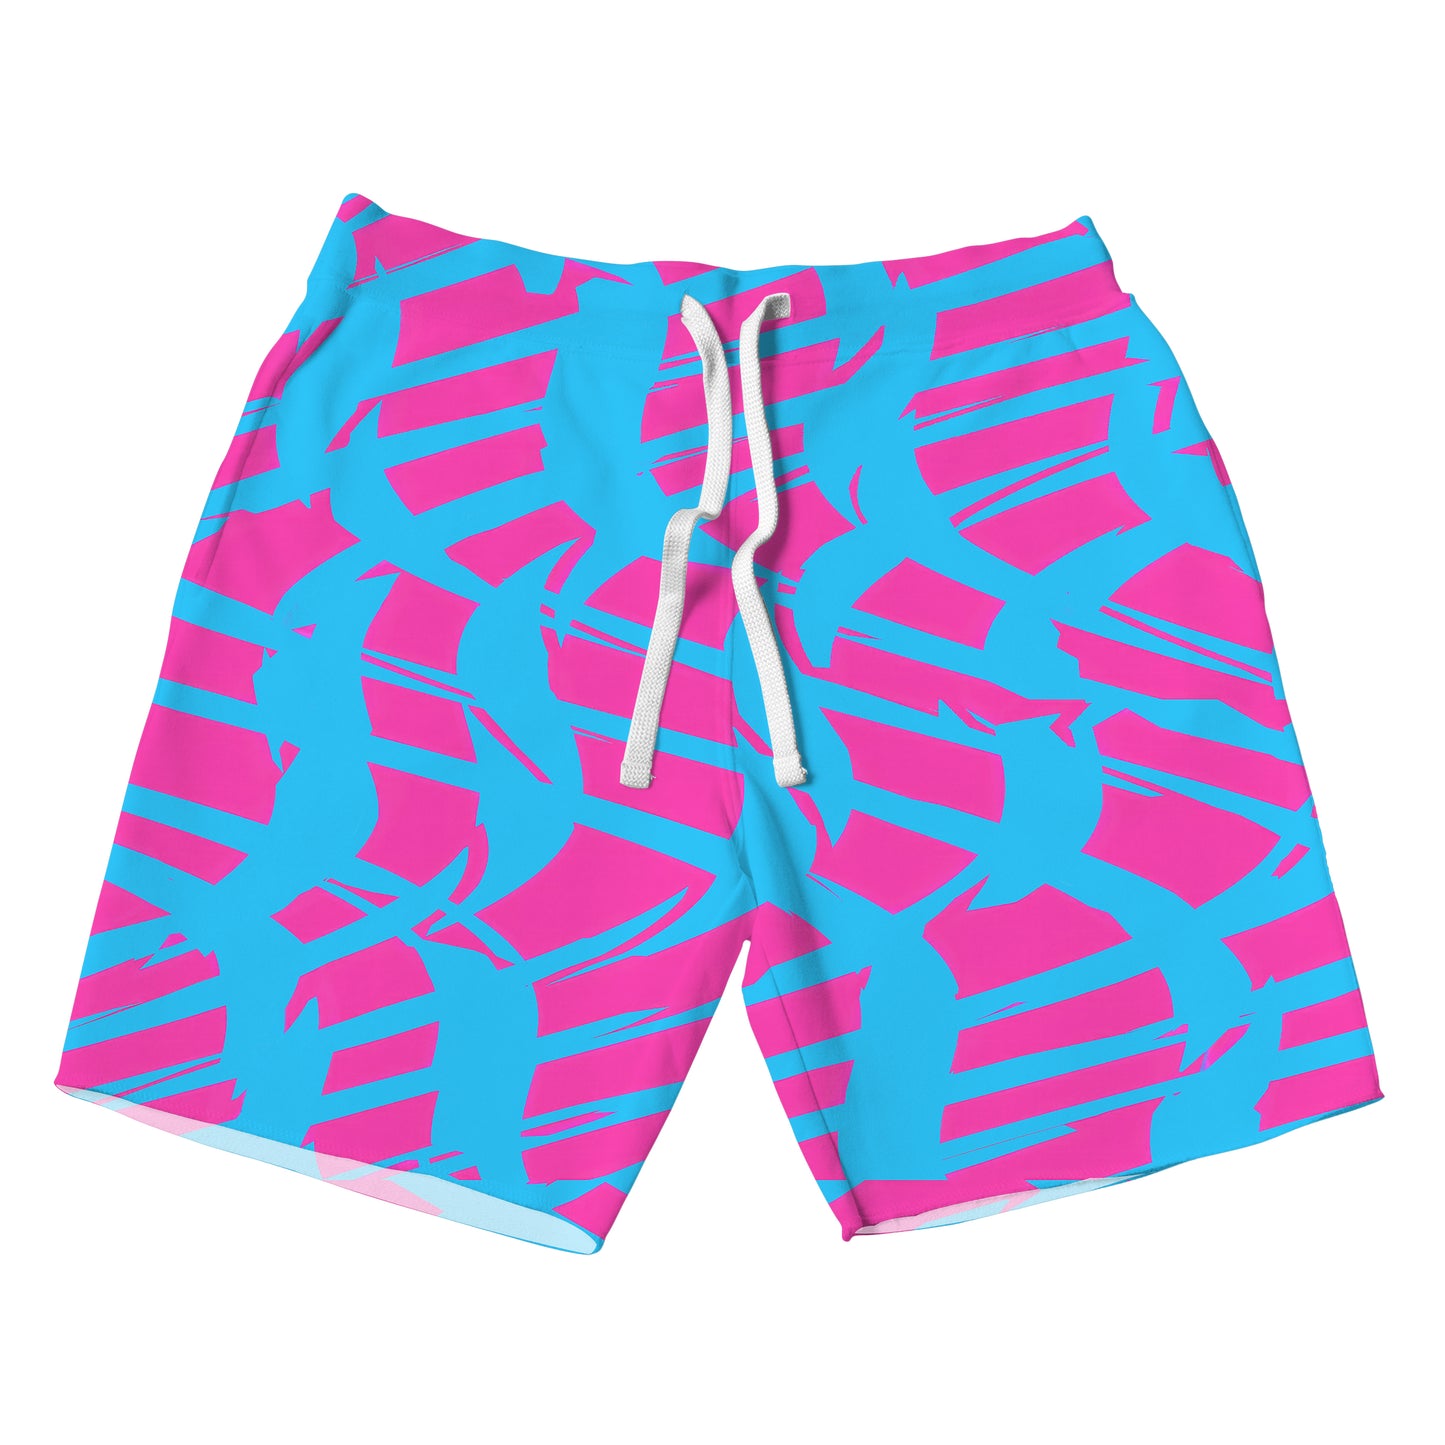 Pink and Blue Squiggly Rave Checkered Cloud Shorts, Big Tex Funkadelic, | iEDM